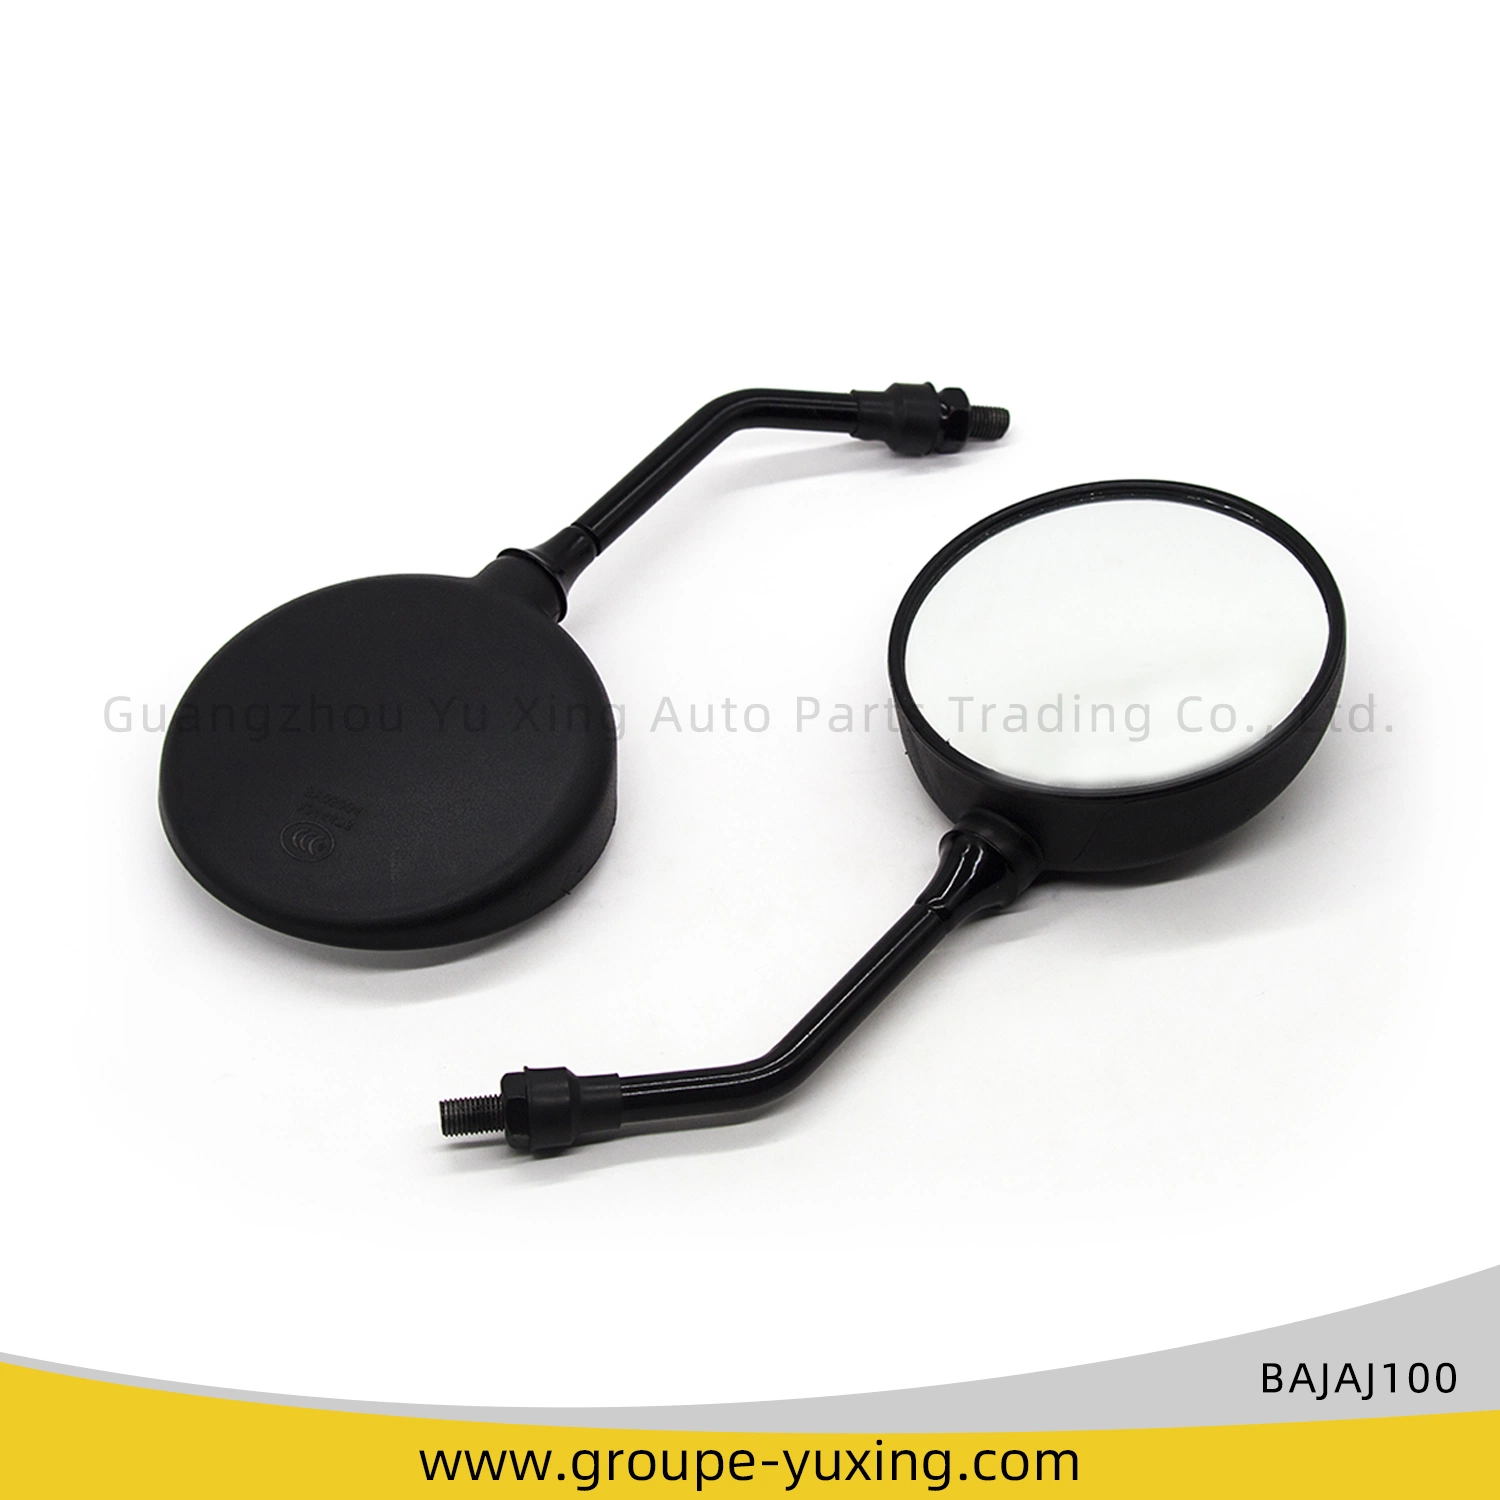 Good Quality Scooter Round Rearview Mirror Motorcycle Rear View Mirror for Bajaj100